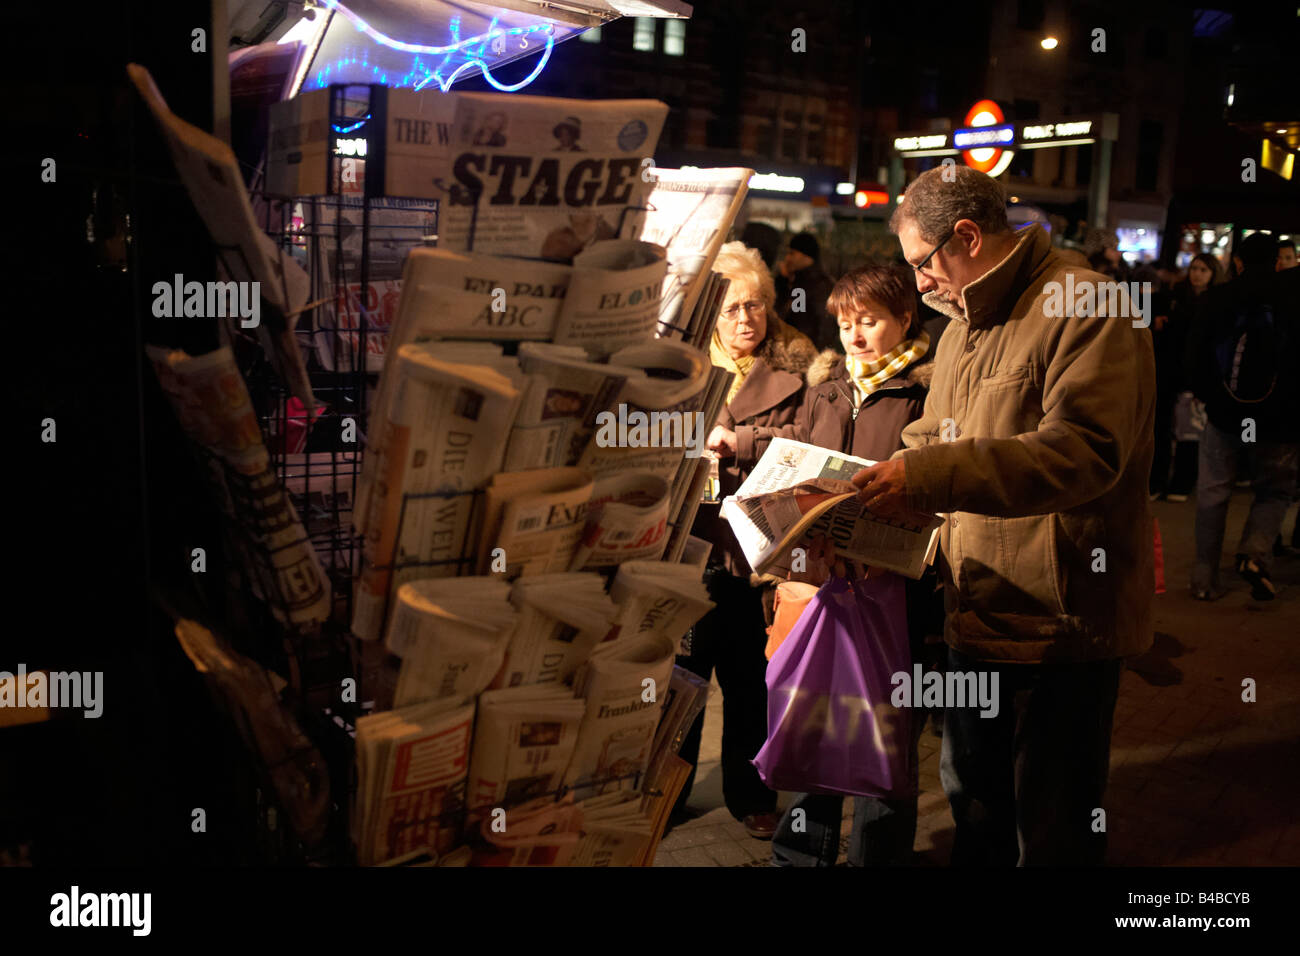 Foreign visitors to Theatreland in London's West End read newspapers at a kiosk lit by spotlights on Tottenham Court Road Stock Photo